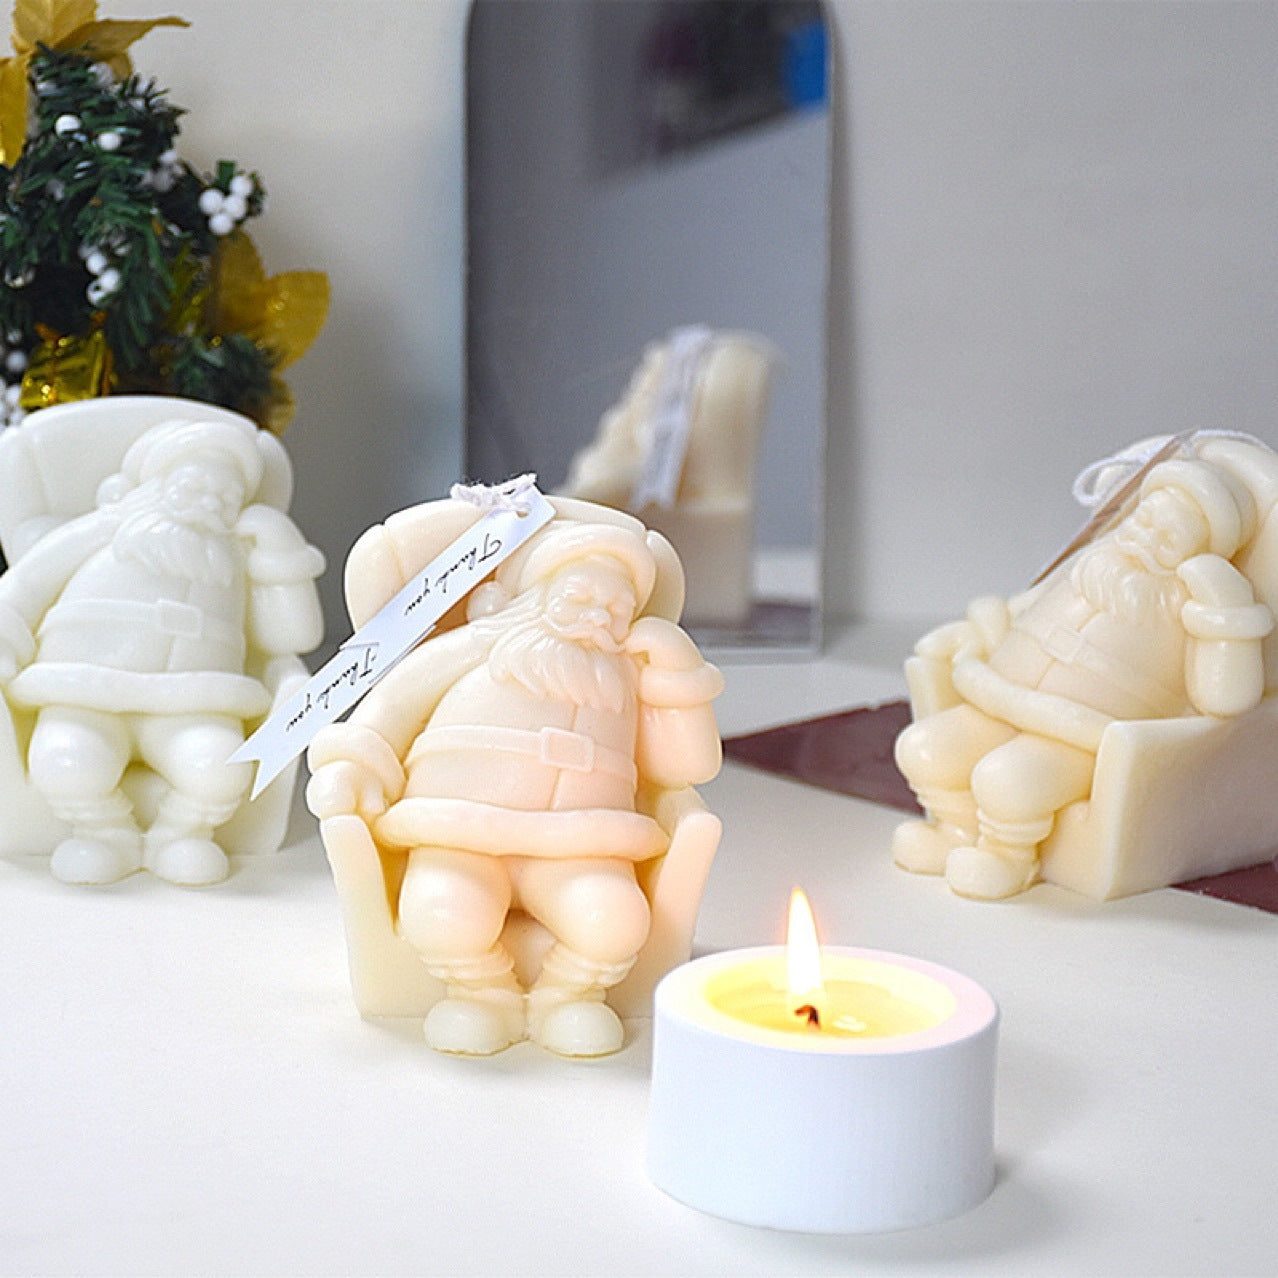 Napping Santa Claus Aromatherapy Candle Silicone Mold DIY Christmas Decoration Plaster Soft Mold, Christmas Candles, Christmas Santa Claus Candles, Santa Claus Candle